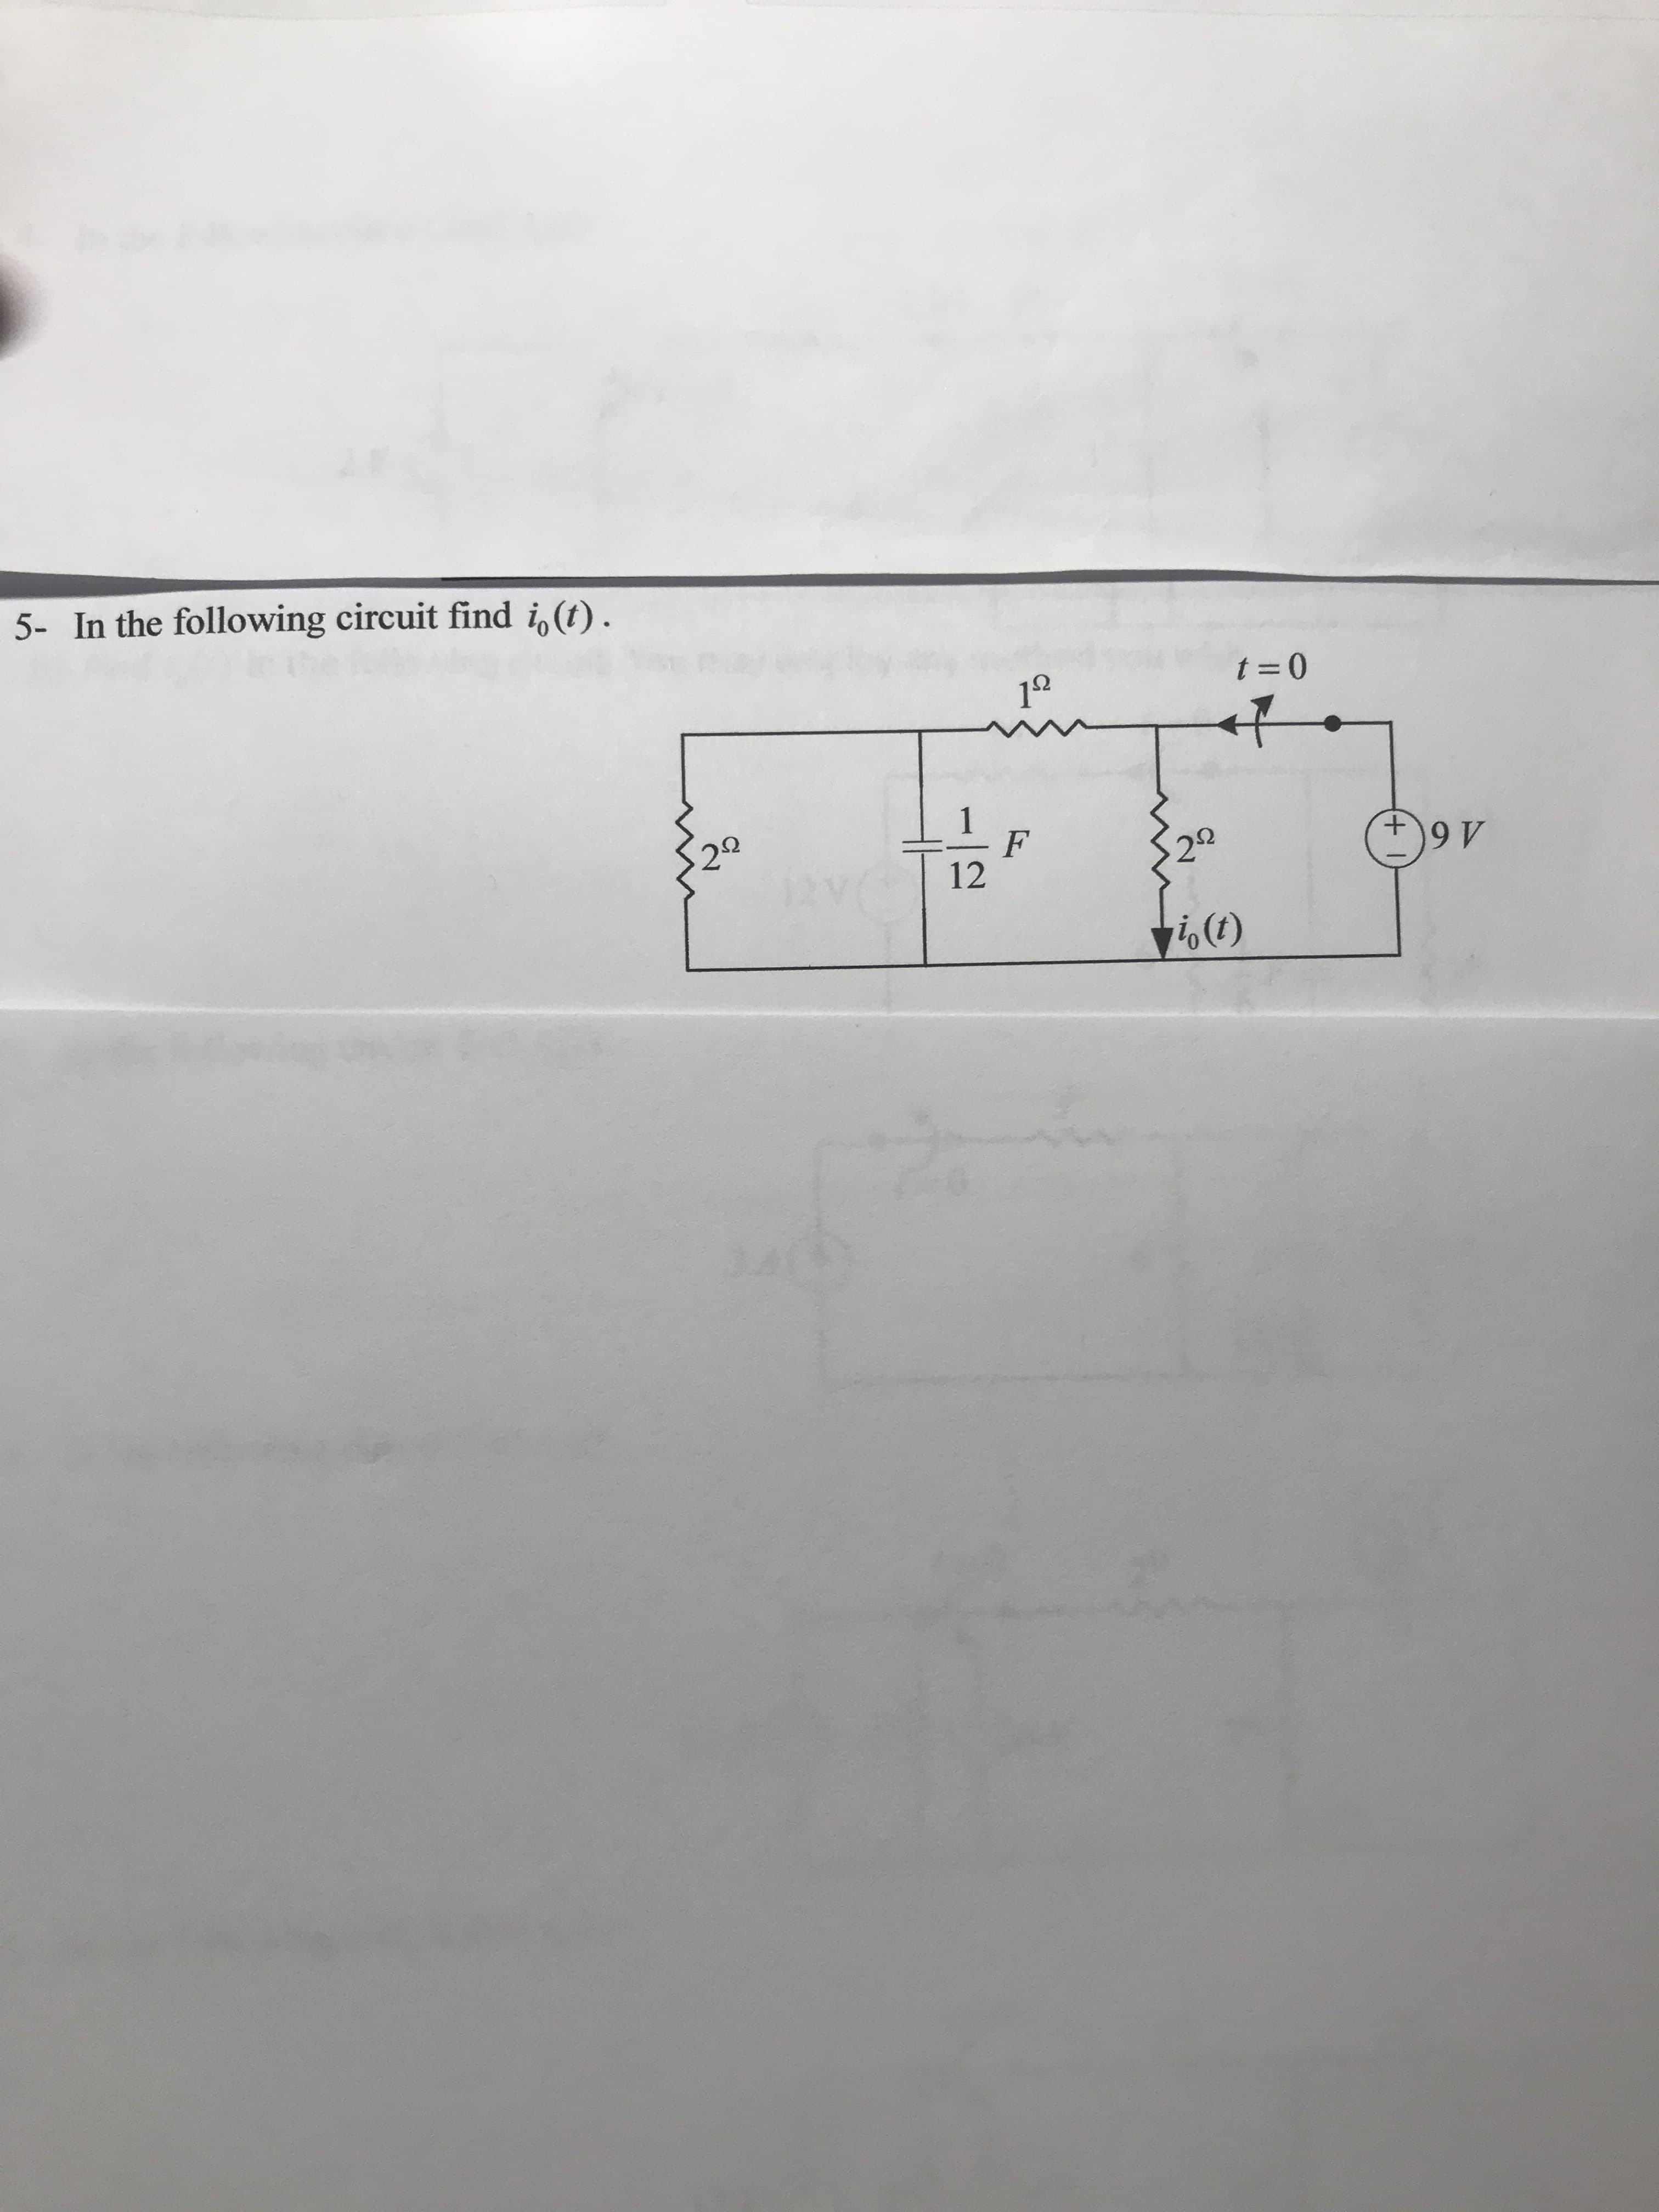 5- In the following circuit find io)
t-0
2Ω
2
12
o (t)
